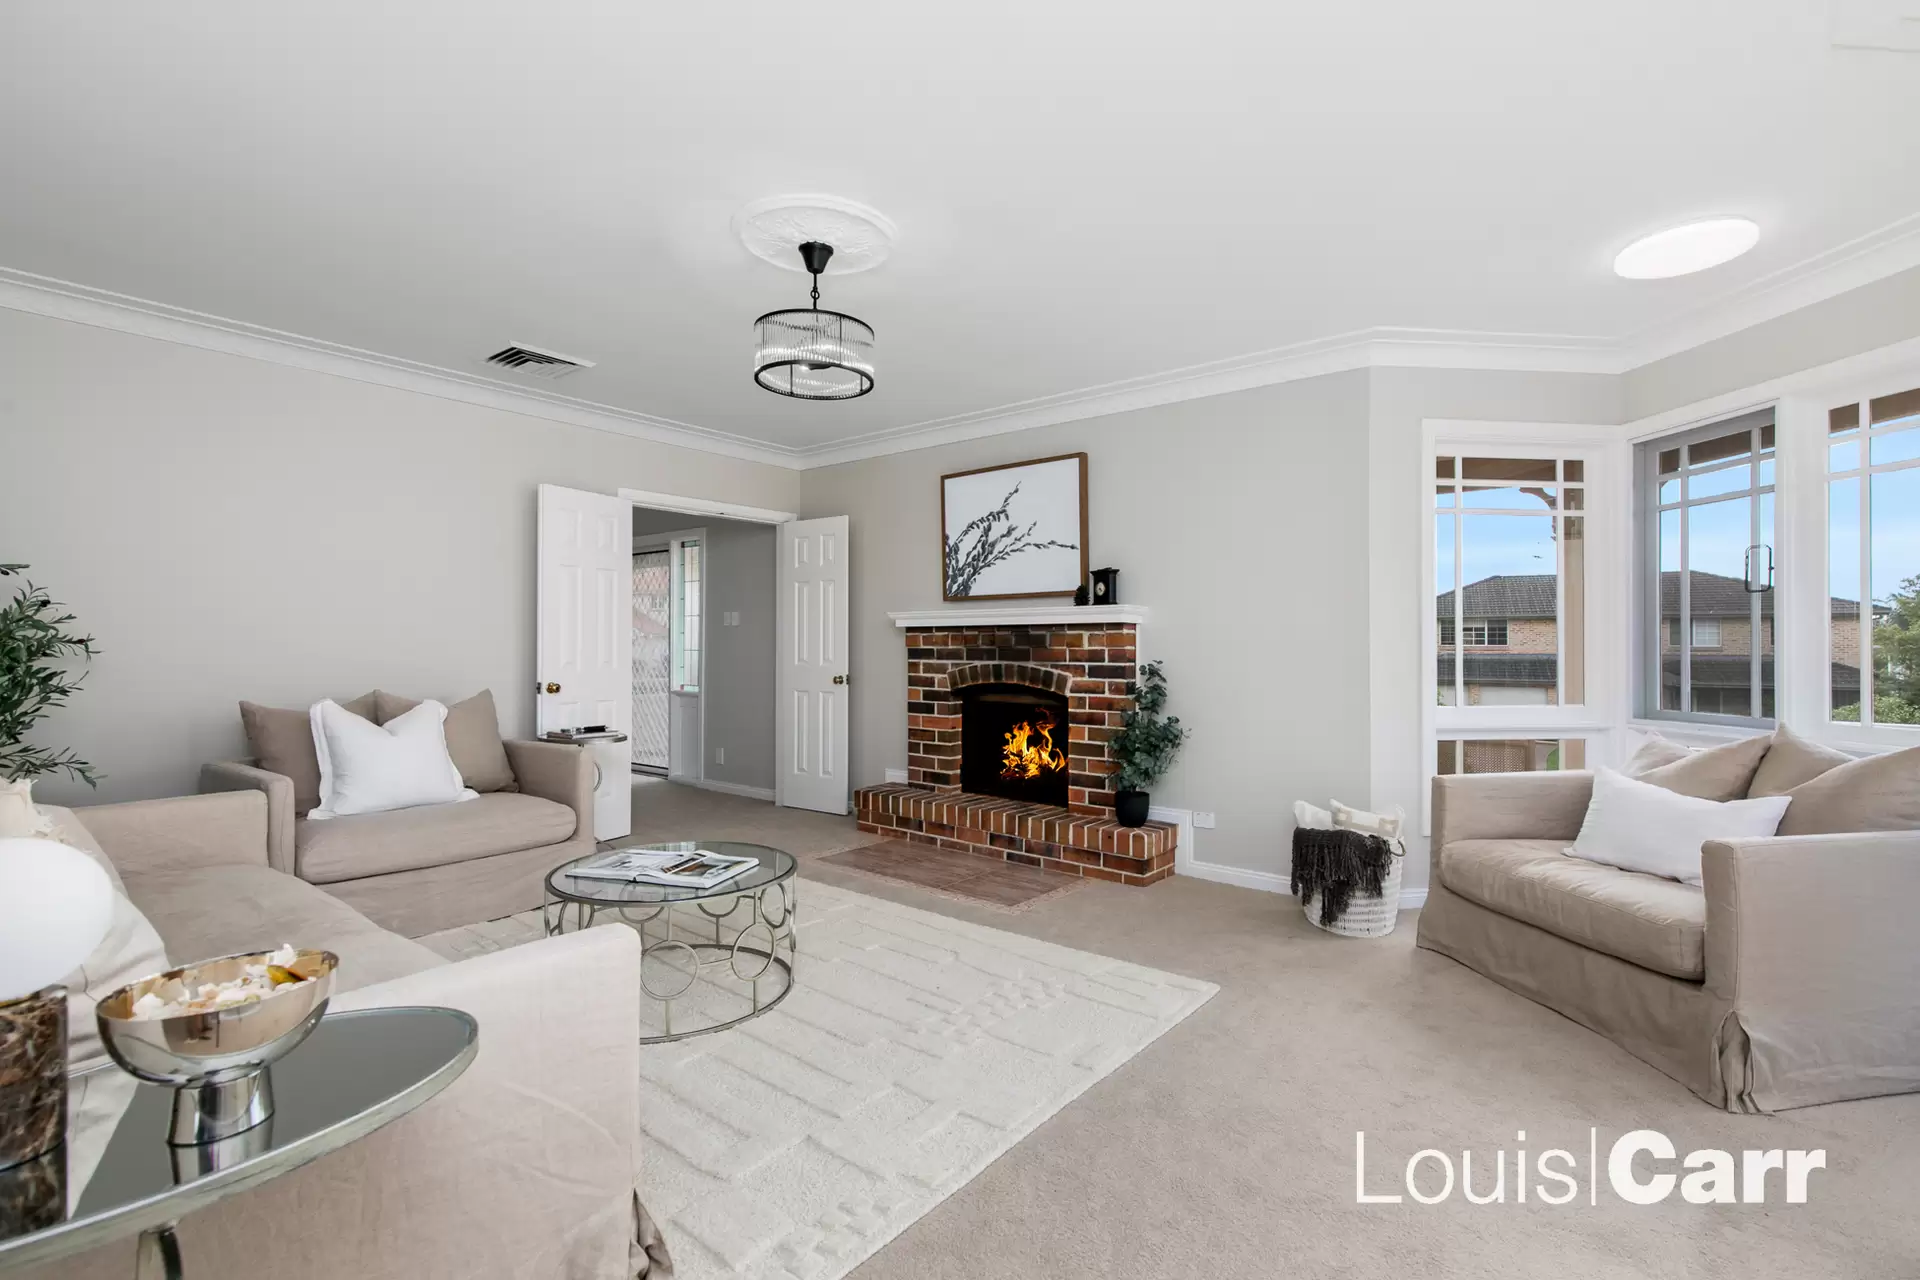 Photo #3: 16 Ellerslie Drive, West Pennant Hills - Sold by Louis Carr Real Estate